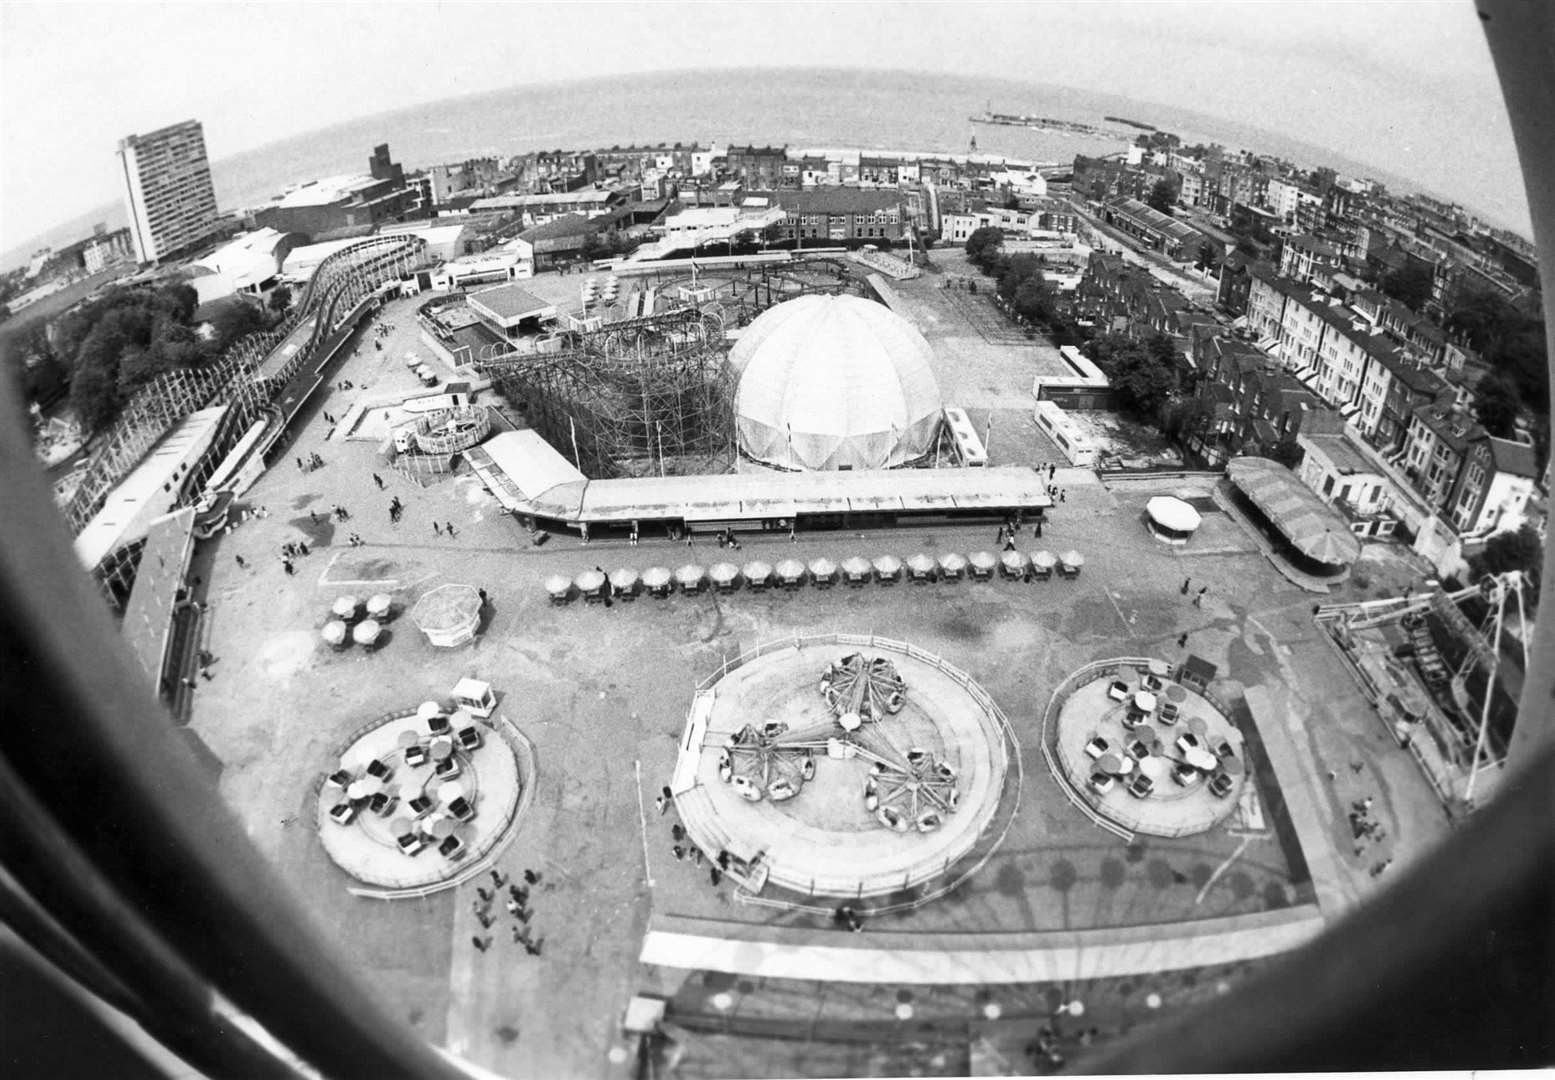 The view from Britain's tallest big wheel looking down across Dreamland, then named the Bembom Brothers Theme Park, in 1983